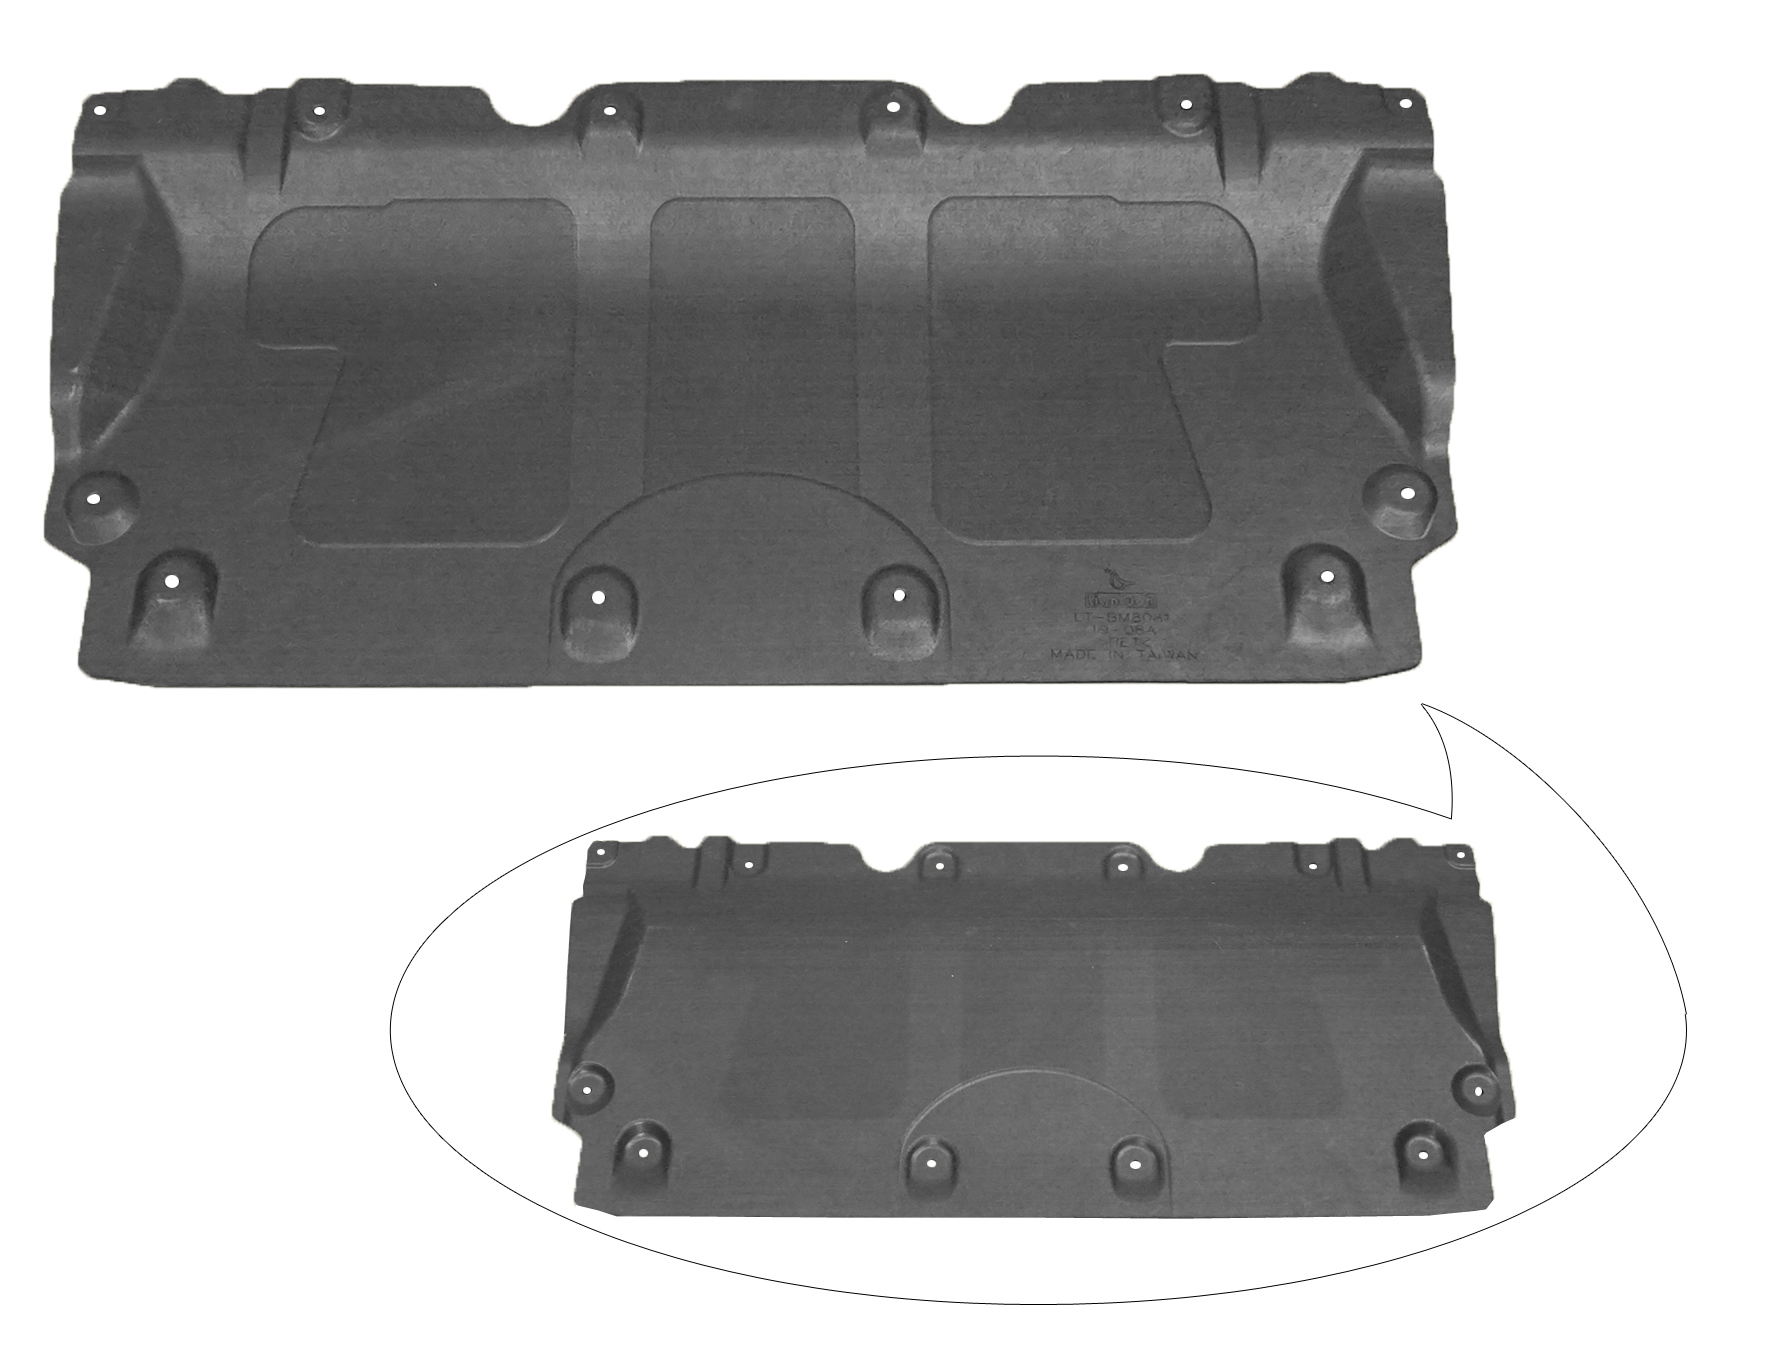 Aftermarket UNDER ENGINE COVERS for BMW - 330E XDRIVE, 330e xDrive,21-24,Lower engine cover